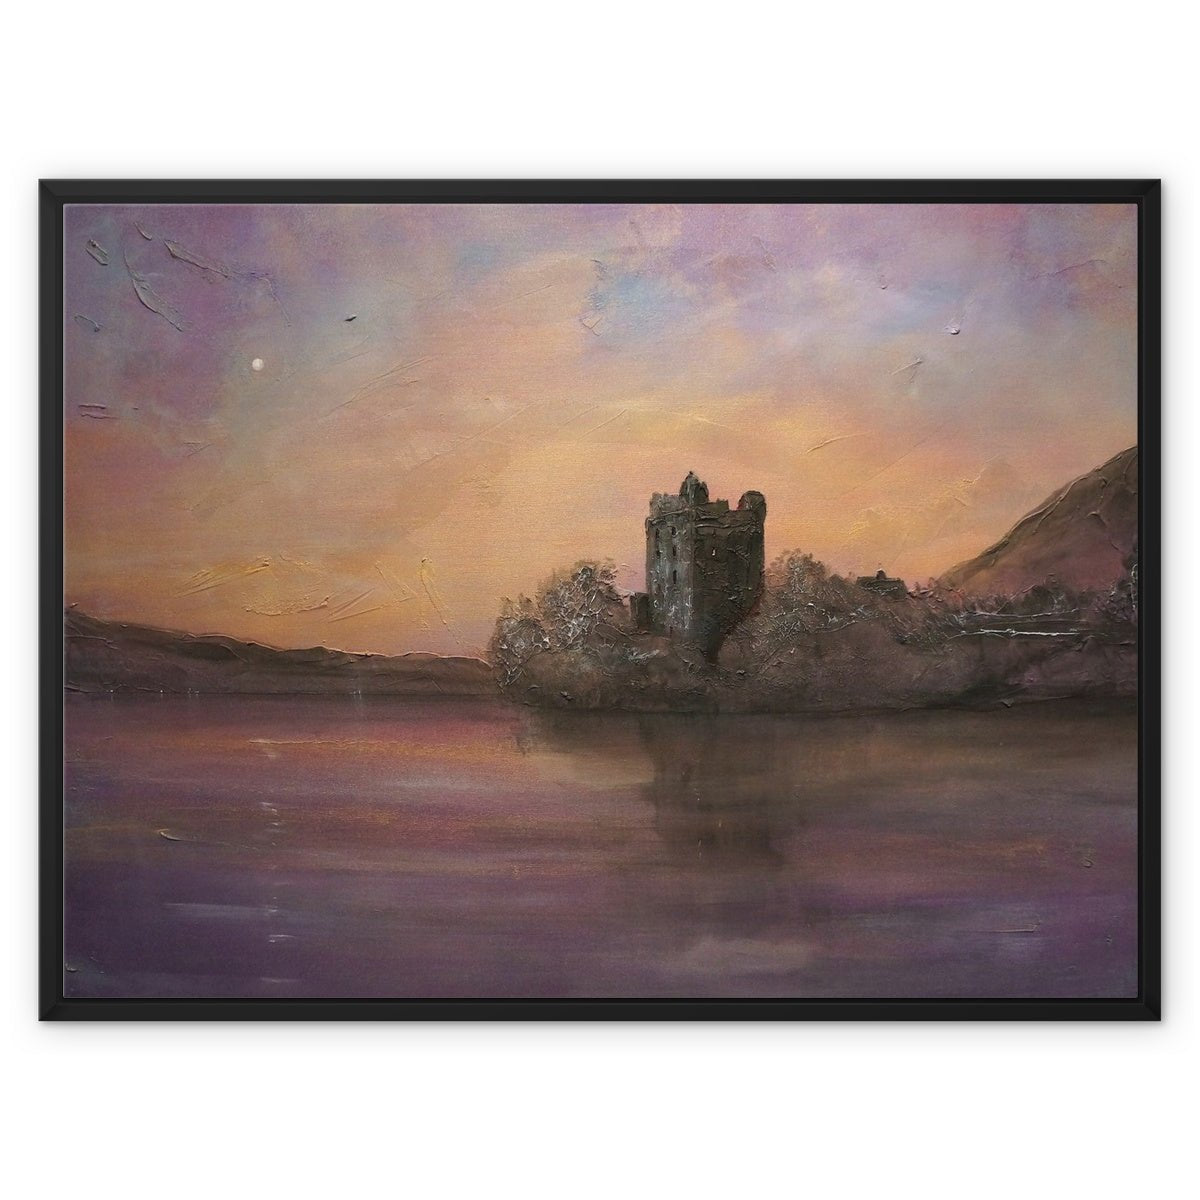 Urquhart Castle Moonlight Painting | Framed Canvas From Scotland-Floating Framed Canvas Prints-Historic & Iconic Scotland Art Gallery-32"x24"-Paintings, Prints, Homeware, Art Gifts From Scotland By Scottish Artist Kevin Hunter